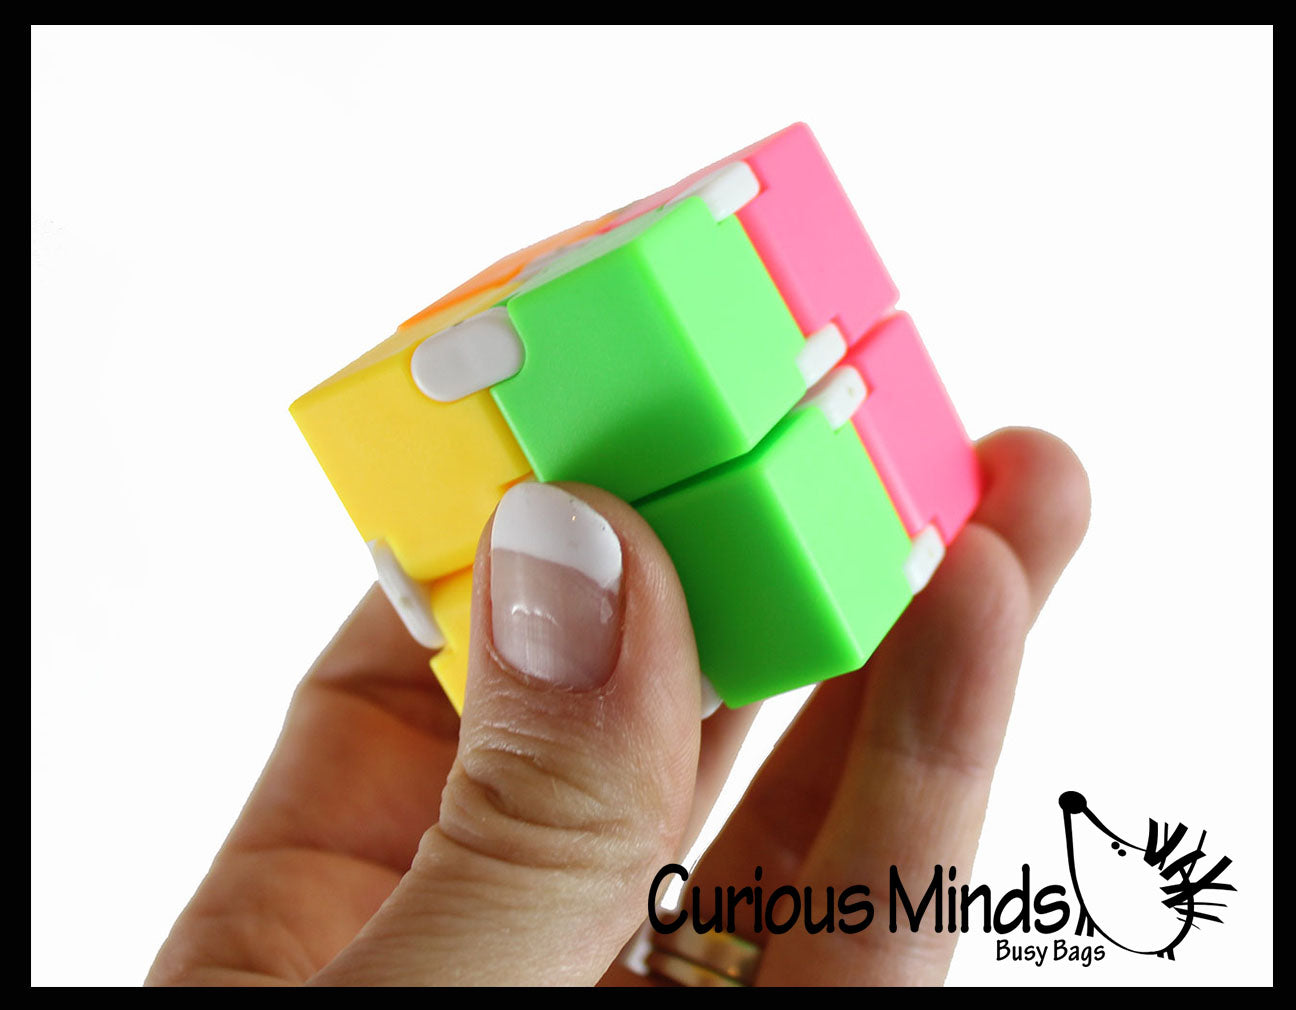 Heavy Infinity Cube - Magic Endless Folding Fidget Toy - Flip Over and